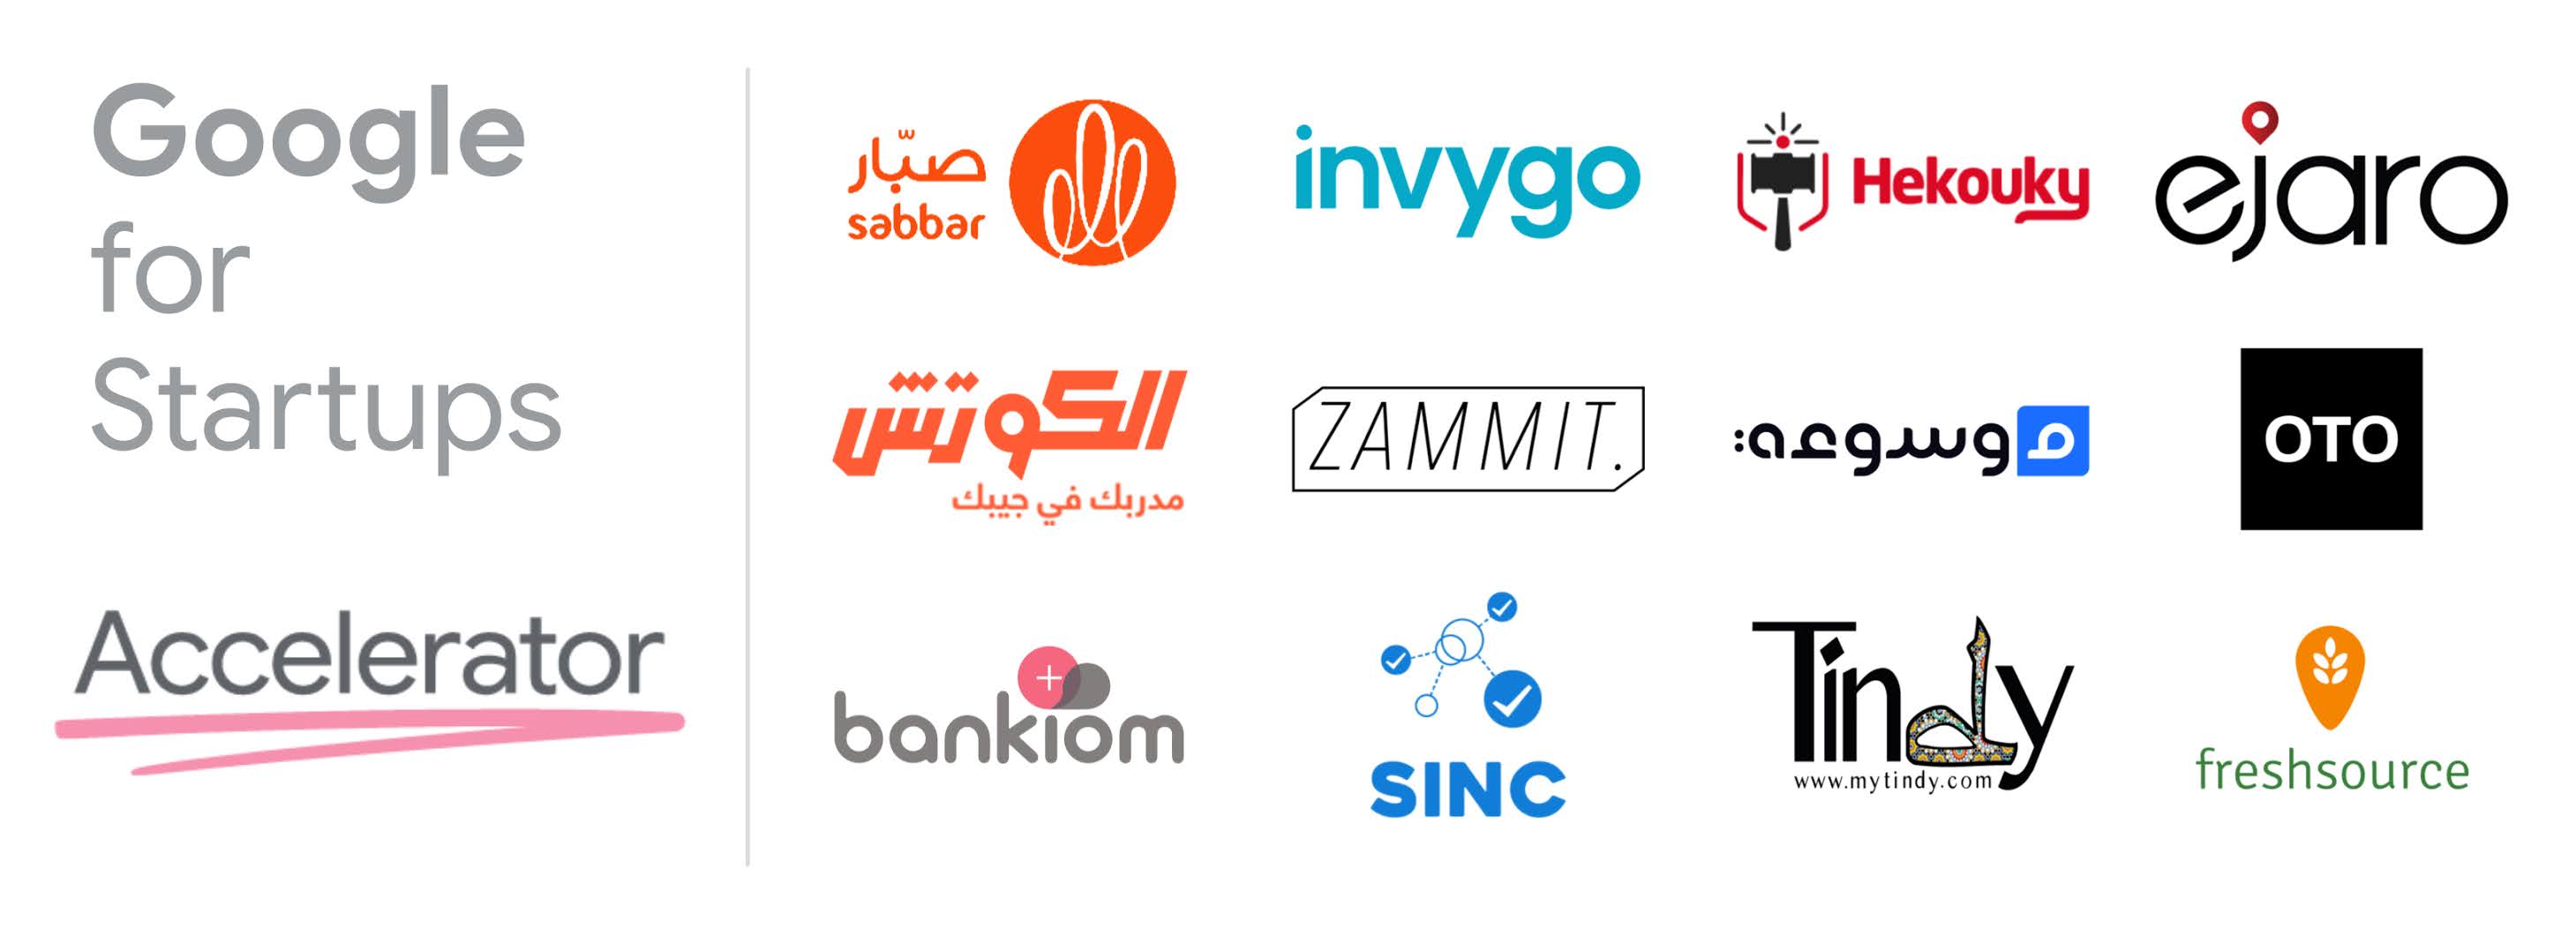 4  Egyptian Companies of a Total of 12  in 2nd Edition of Google for Startup Accelerator